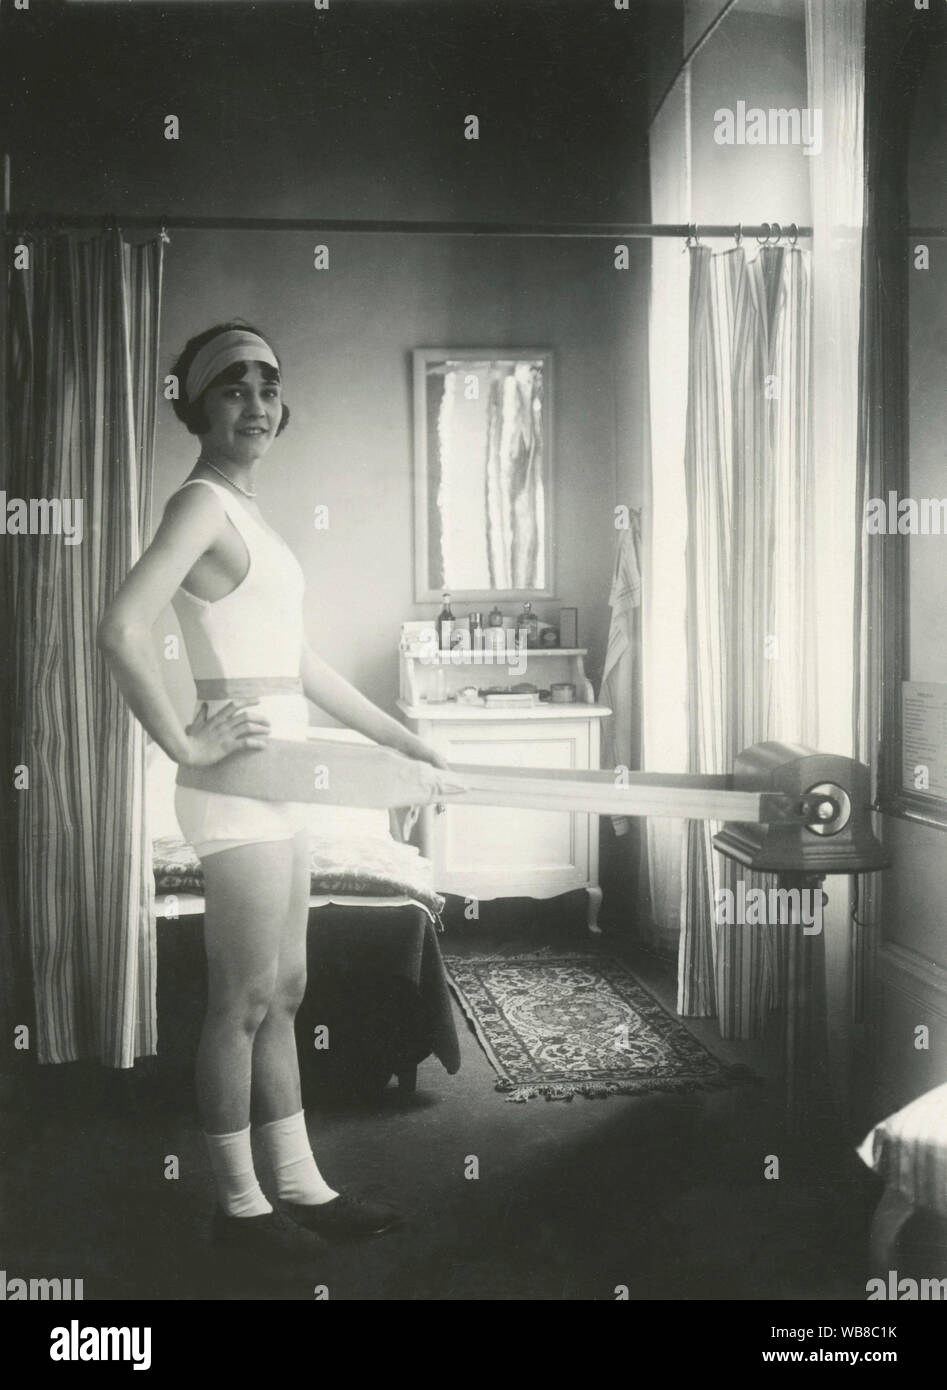 Massage in the 1930s. The swedish actress Disa Gillis demonstrates the belt massager and exercise machine that is designed to vibrate and massage the body. Sweden 1930s Stock Photo